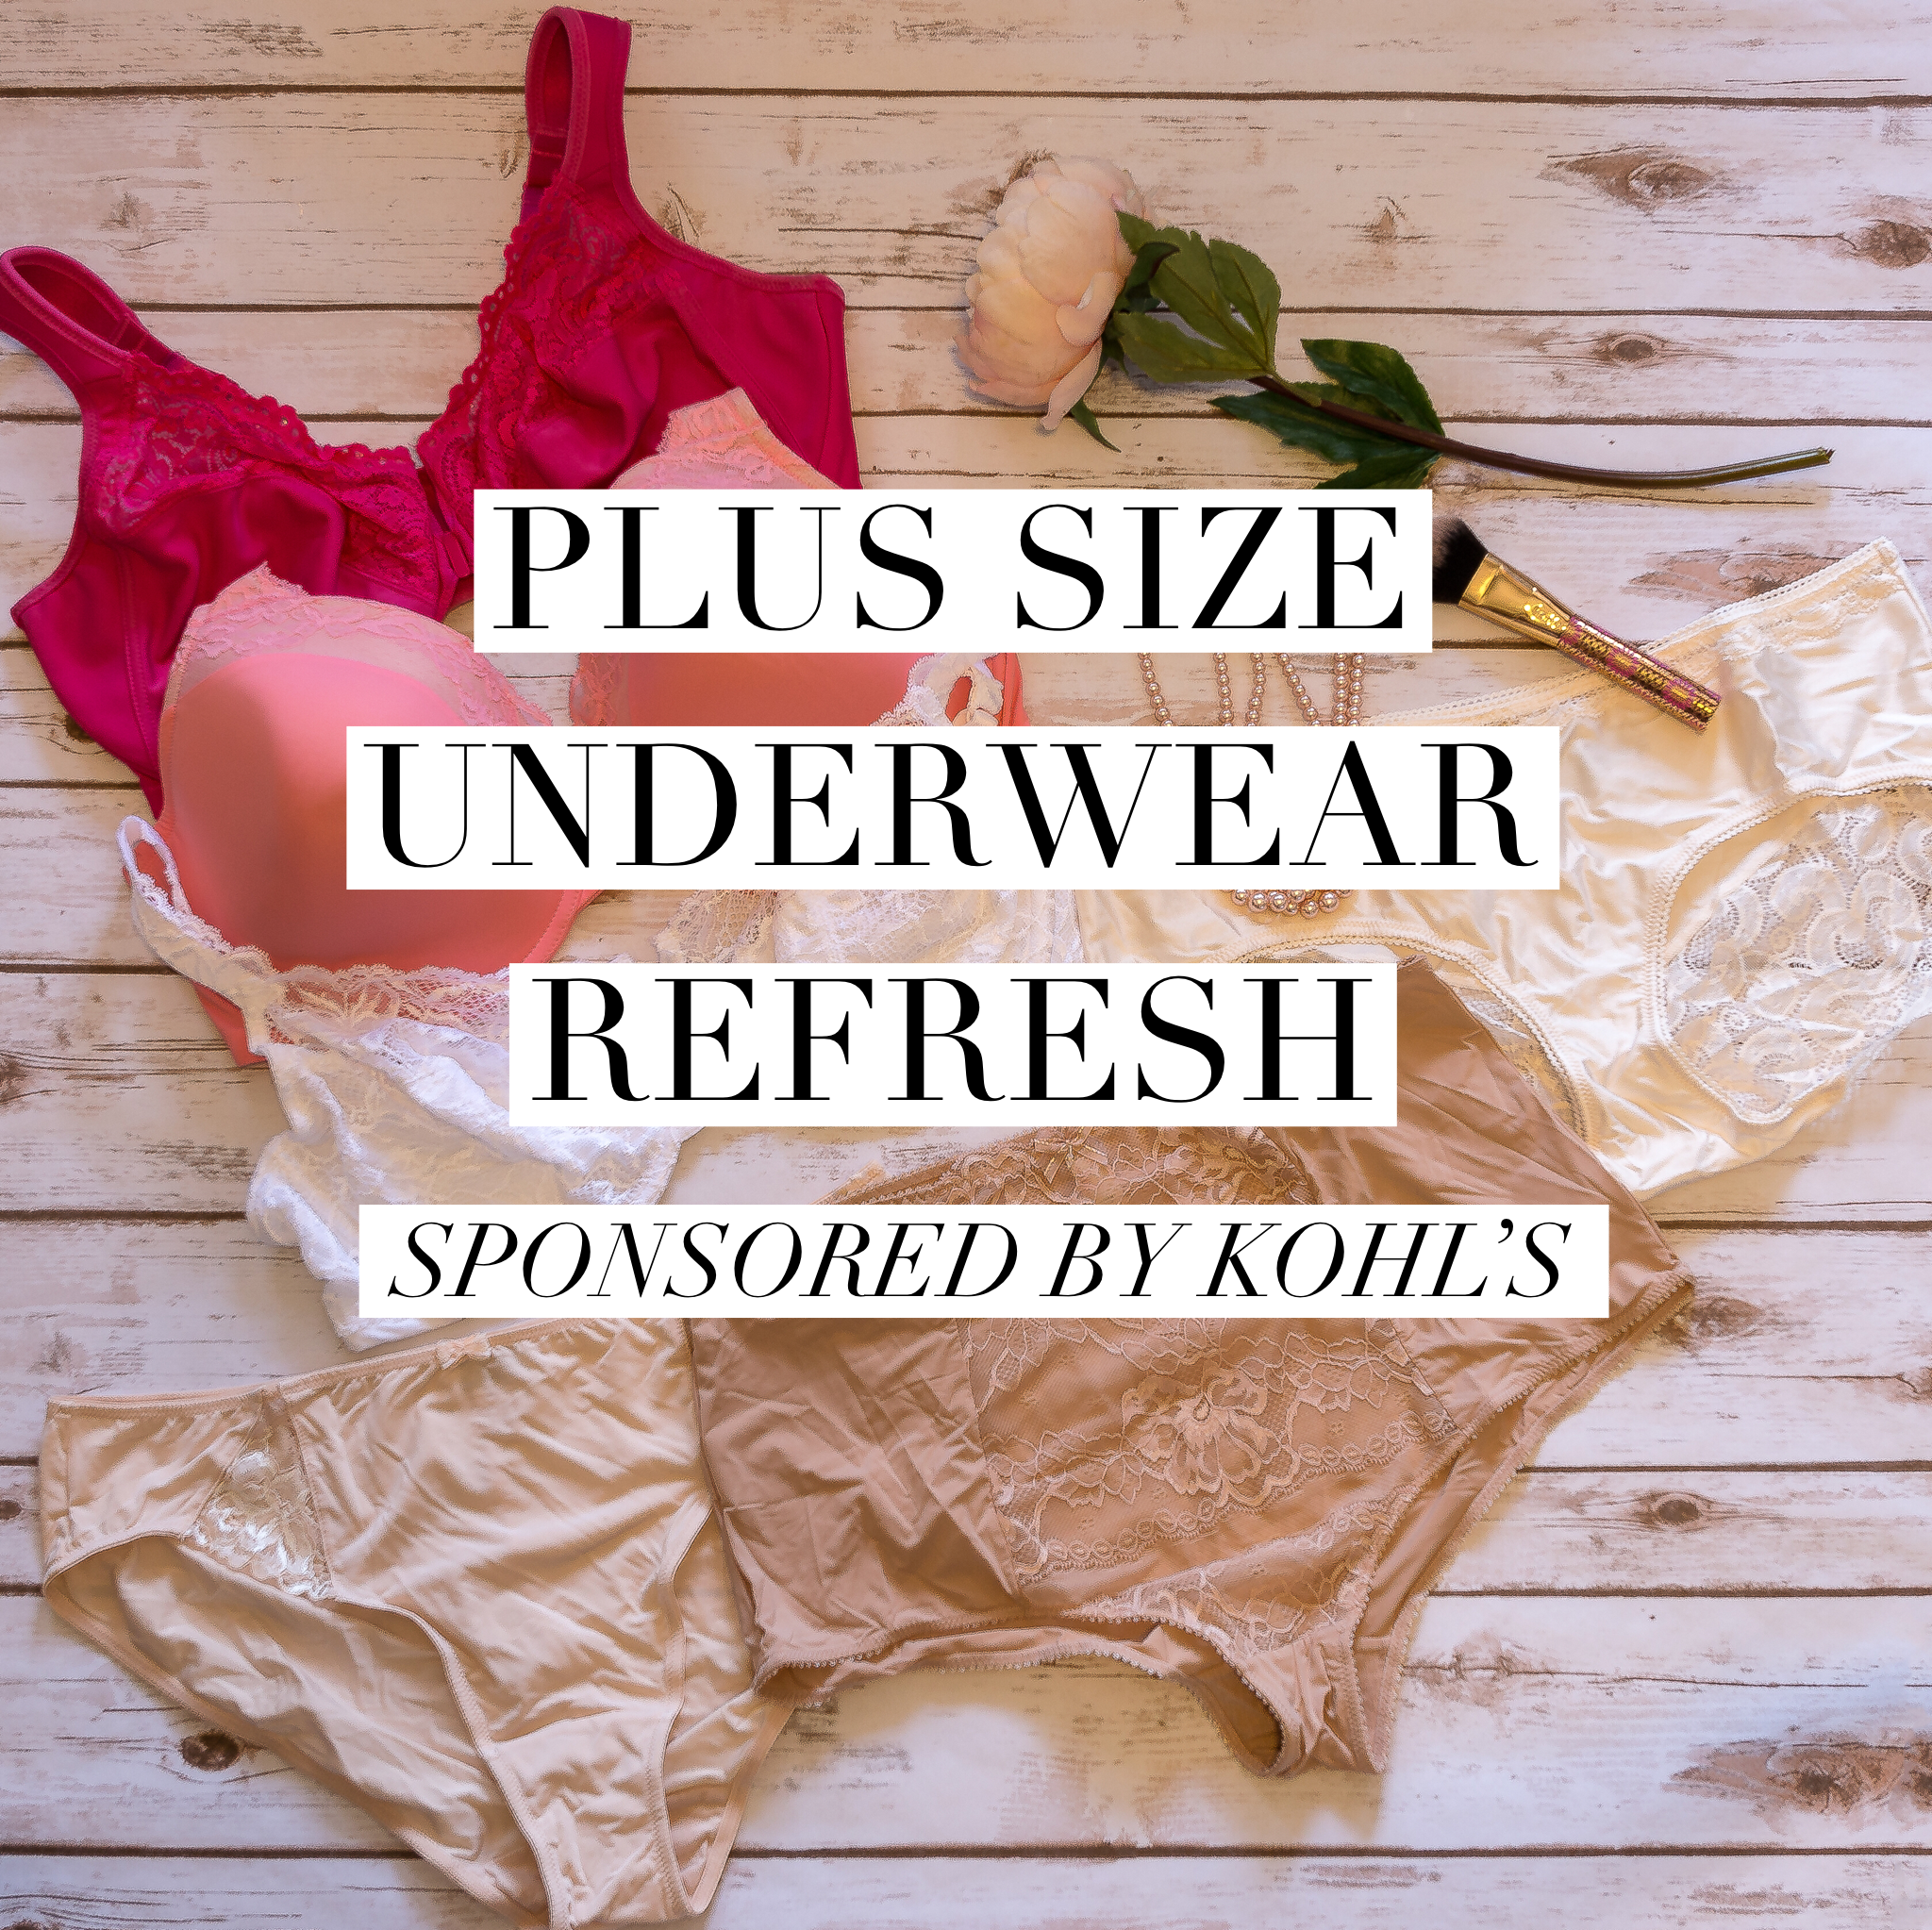 Plus Size Underwear Refresh: New Bras and Panties from Kohl’s